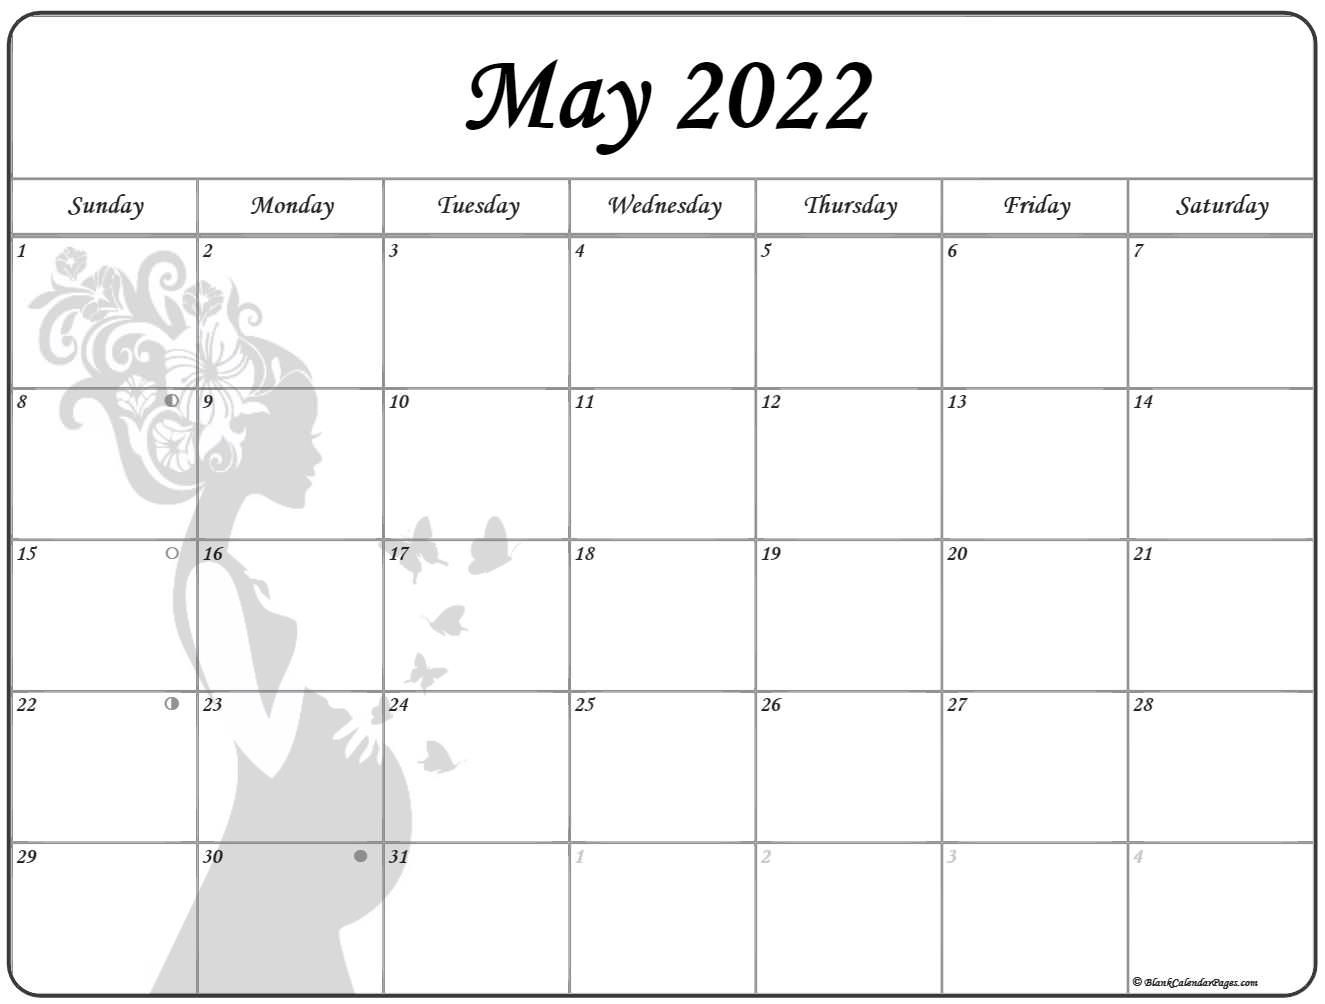 Collection Of May 2022 Photo Calendars With Image Filters.